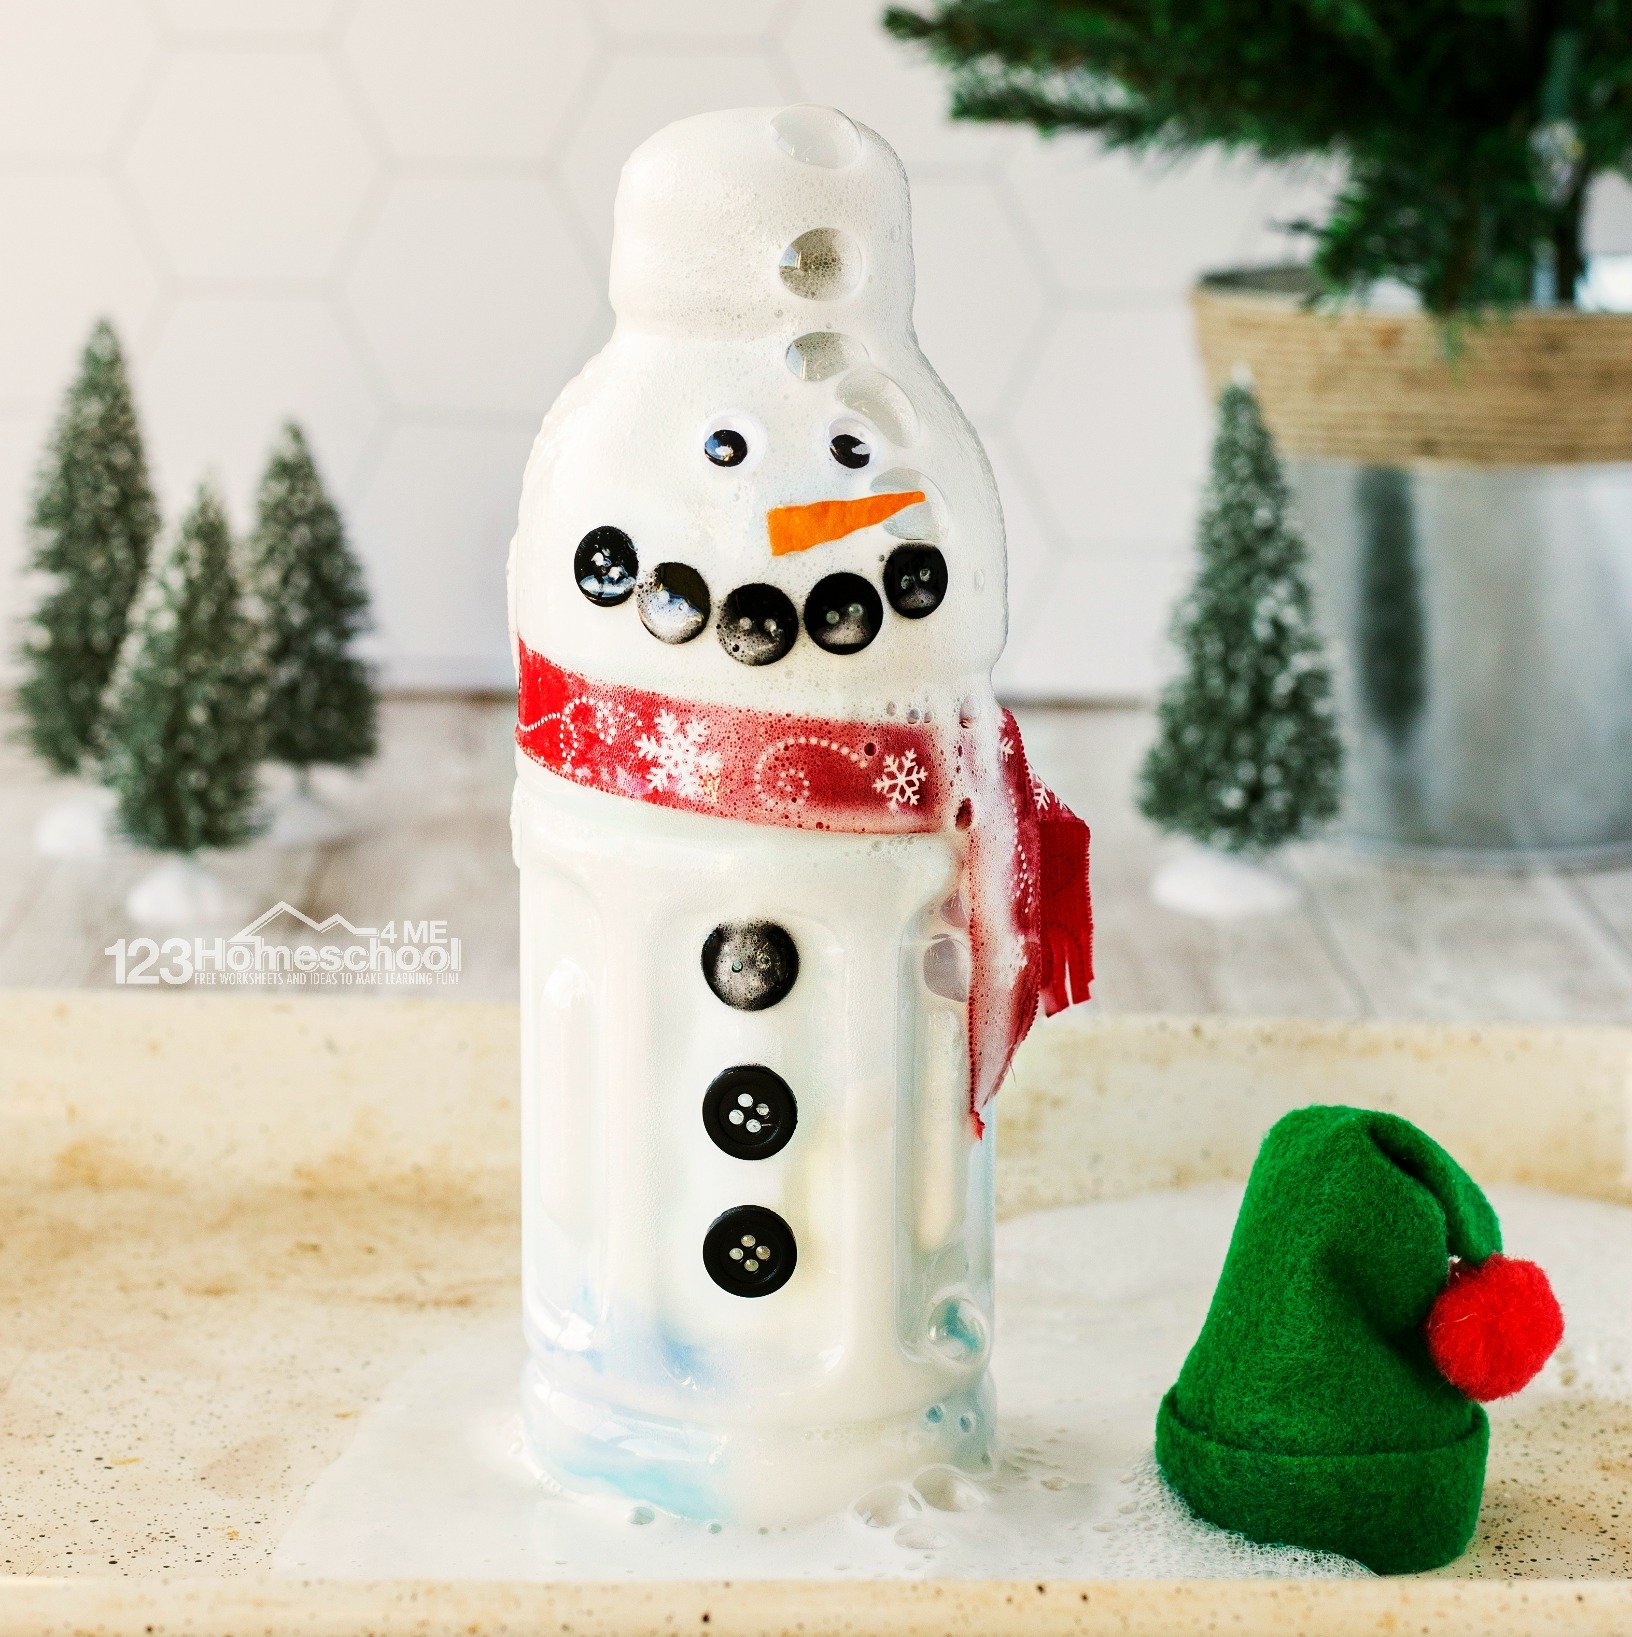 baking soda and vinegar reacting to create an exploding snowman